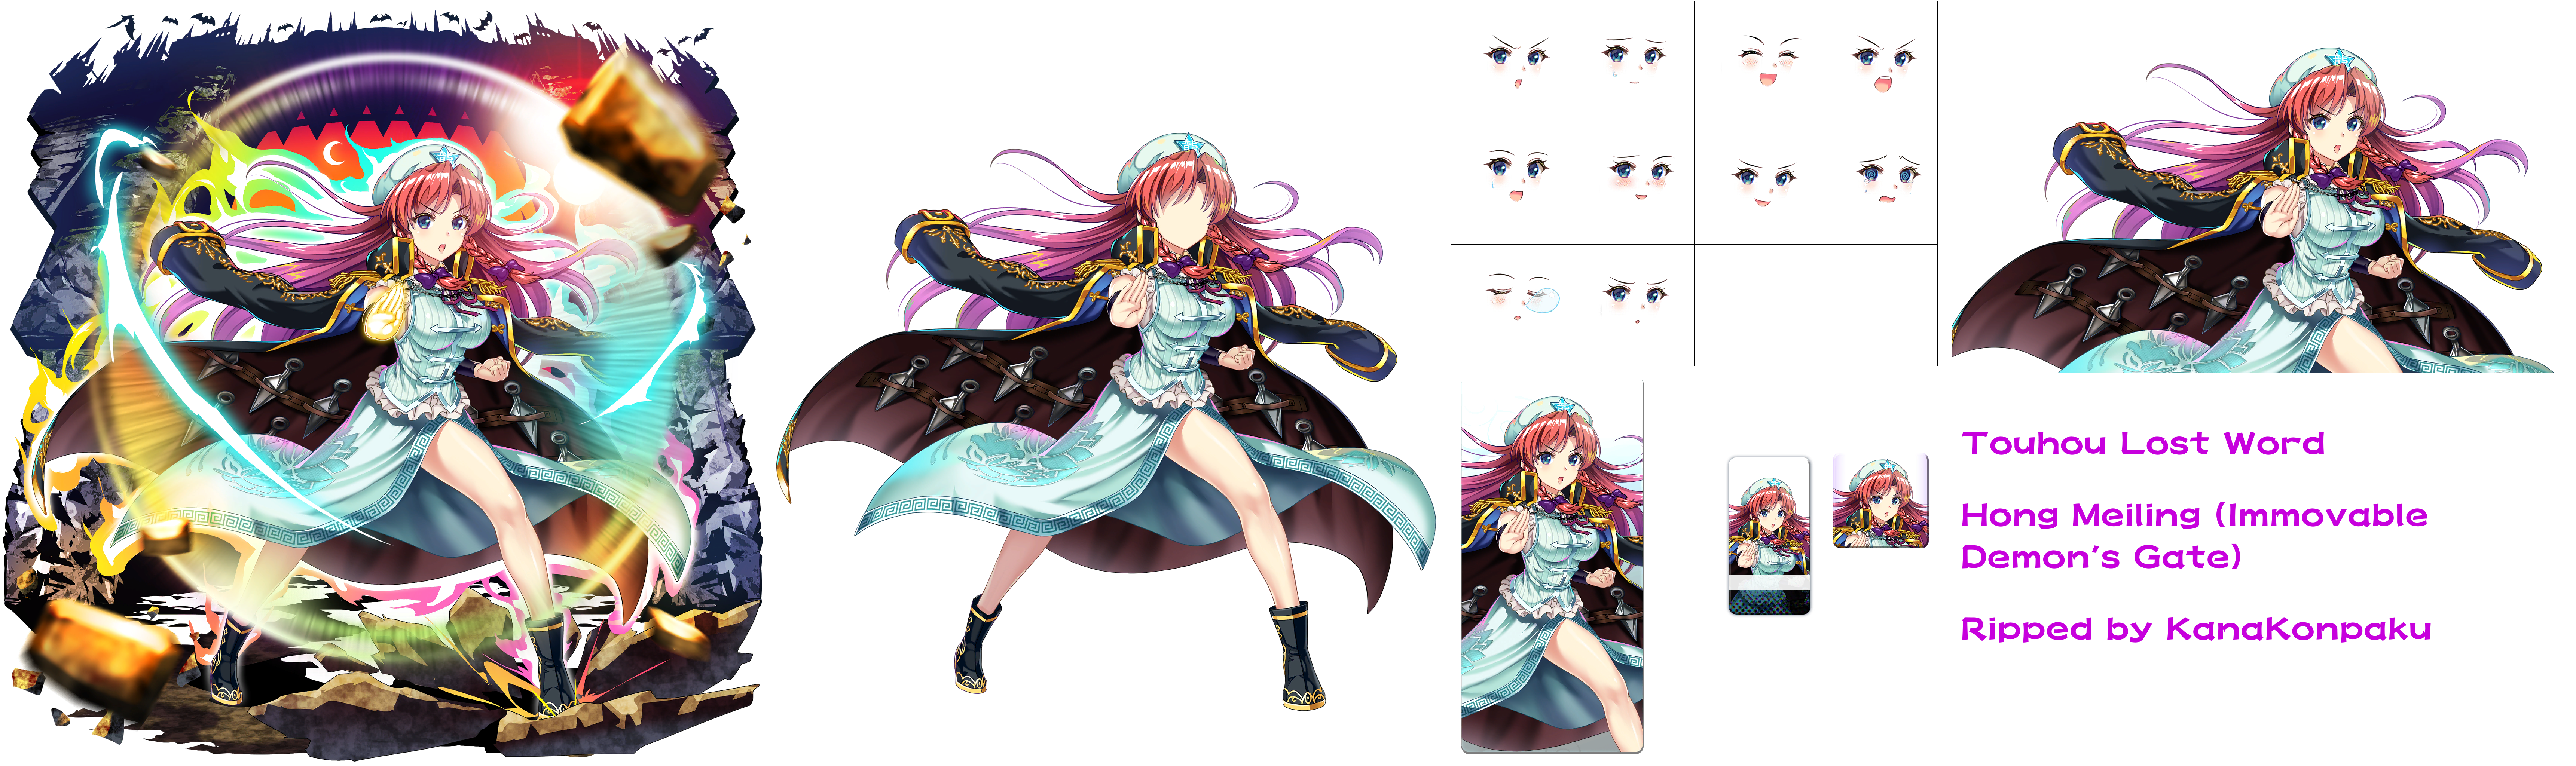 Touhou LostWord - Hong Meiling (Immovable Demon's Gate)